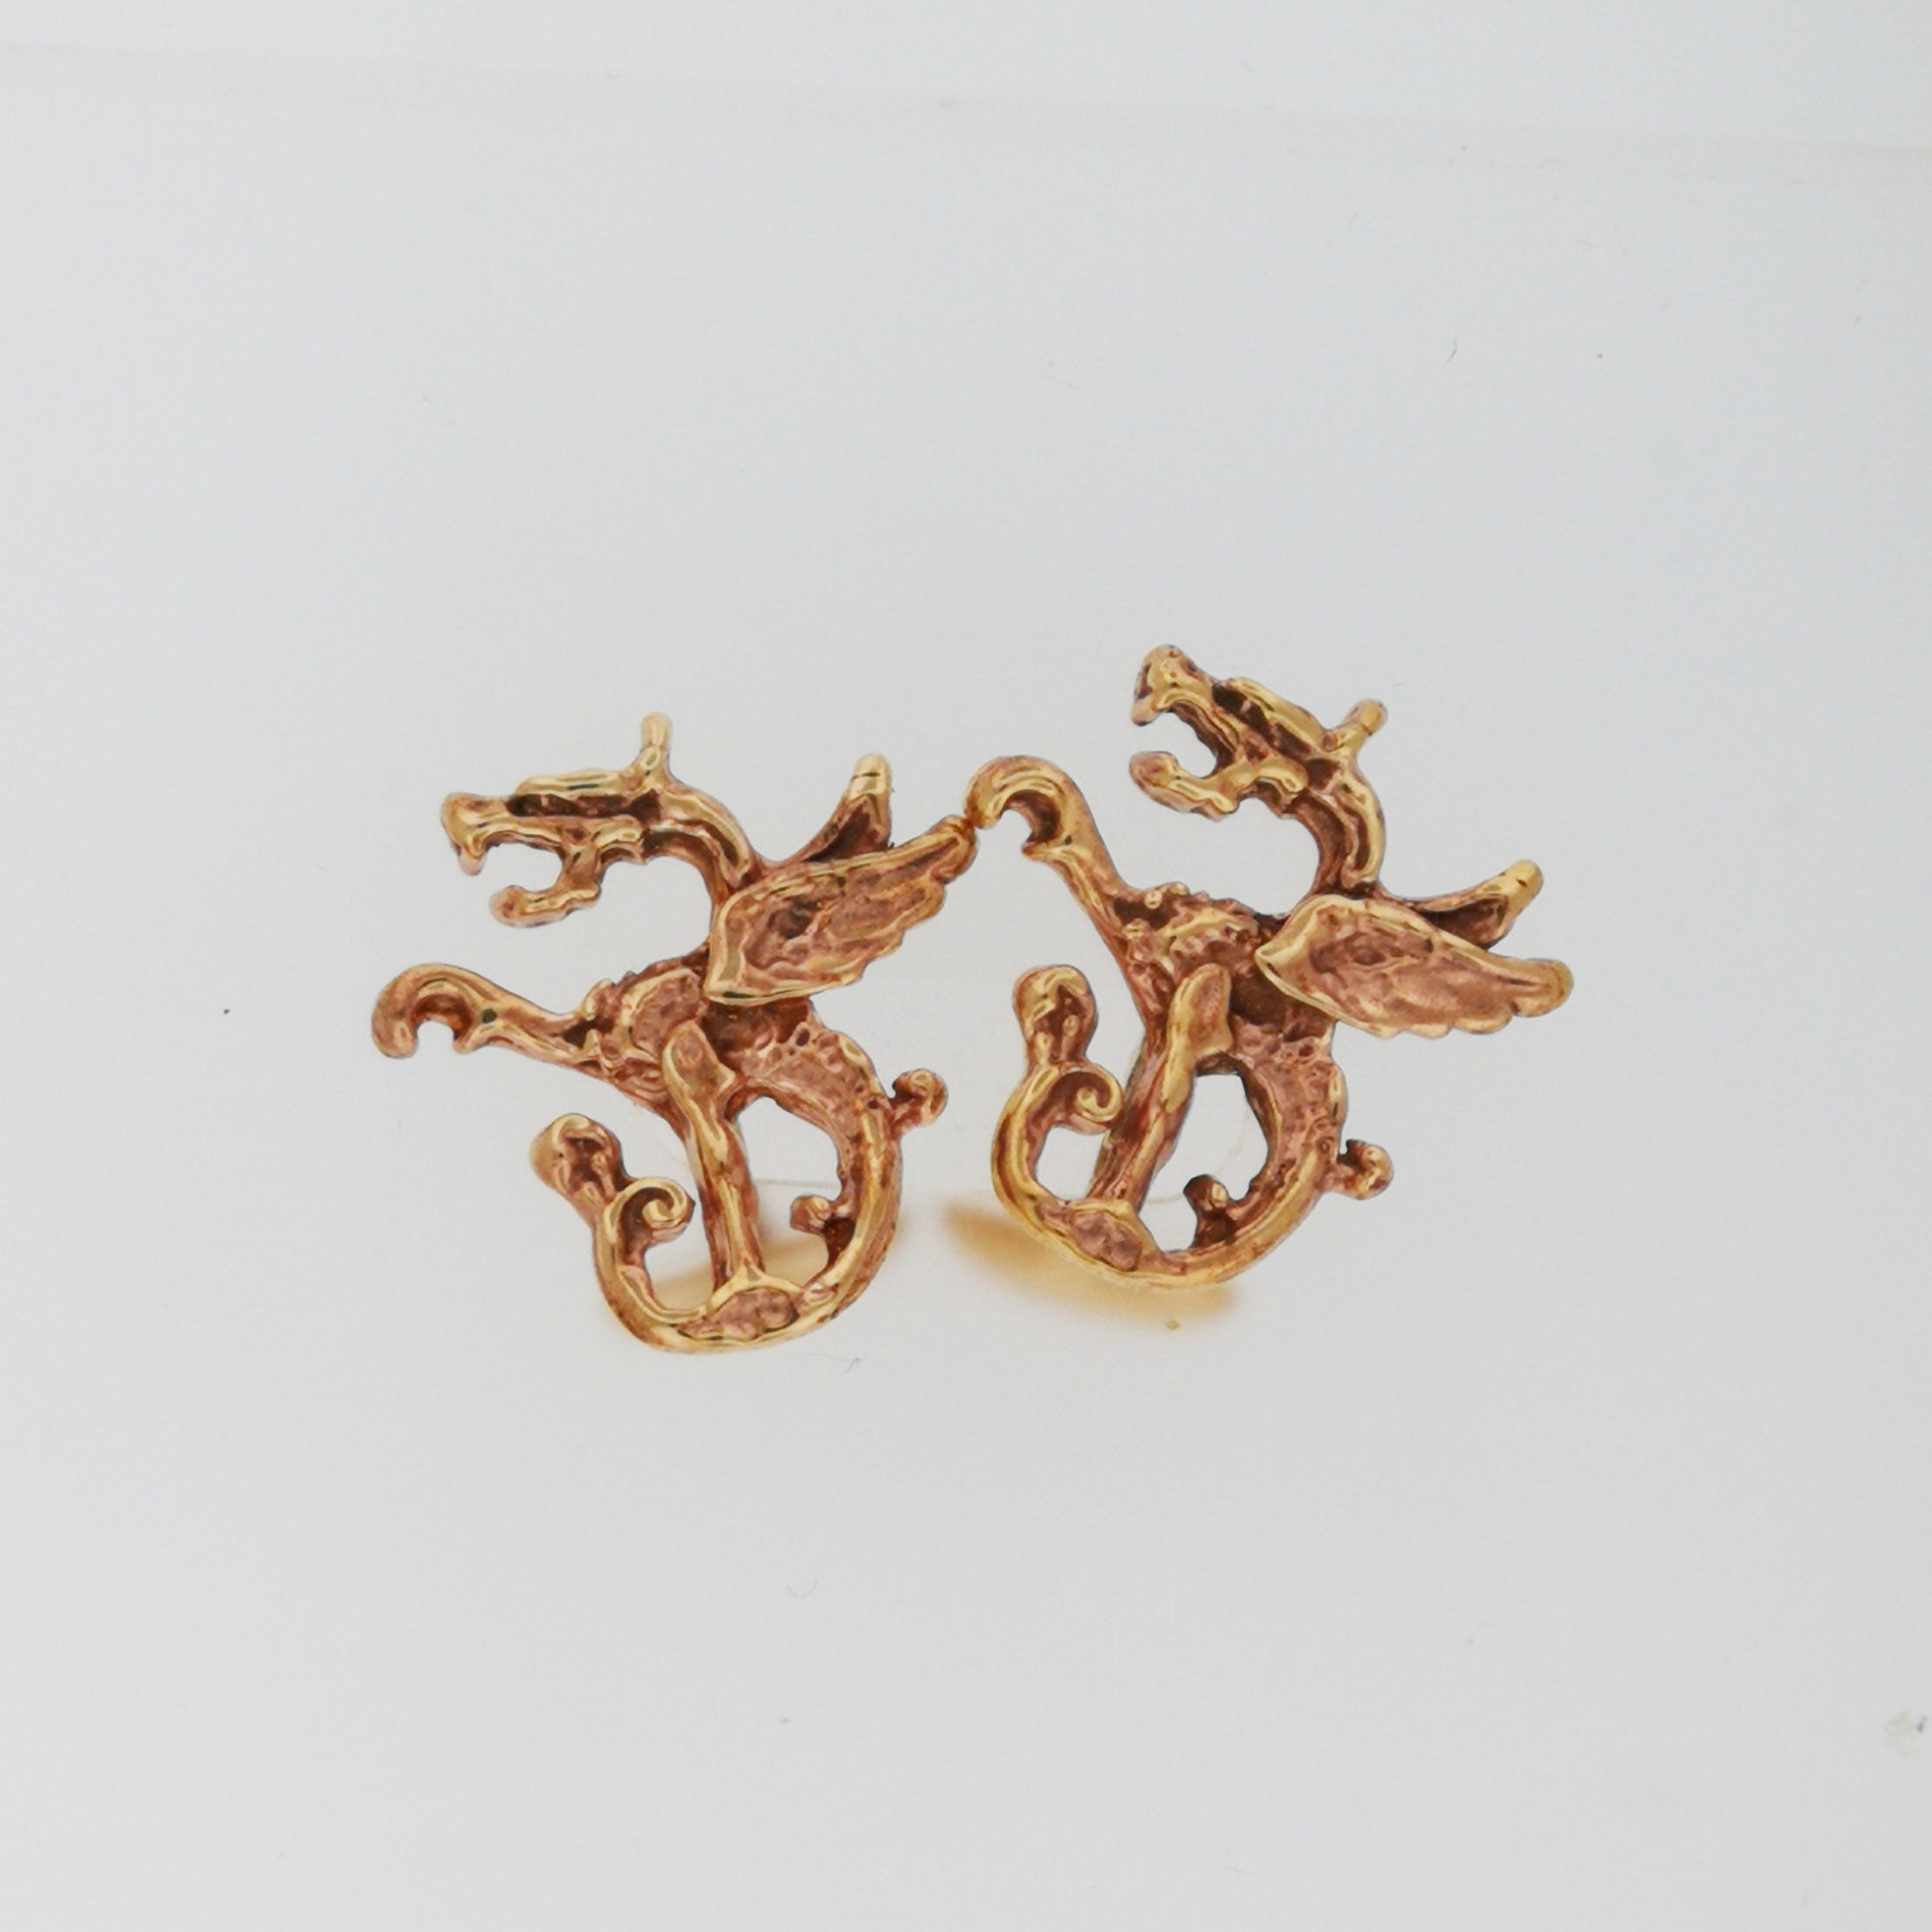 Dragon Cuff Links in Antique Bronze, Here Be Draons, Bronze Fantasy Jewelry, Bronze Fantasy Jewellery, Fantasy Wedding Cufflinks, Bronze Dragon Cufflinks, Dragon Lover Gift, Bronze Fantasy Cufflinks, Bronze Dragon Jewelry, Bronze Dragon Jewellery, Dragon Wedding Cufflinks, Fantasy Cufflinks Gift